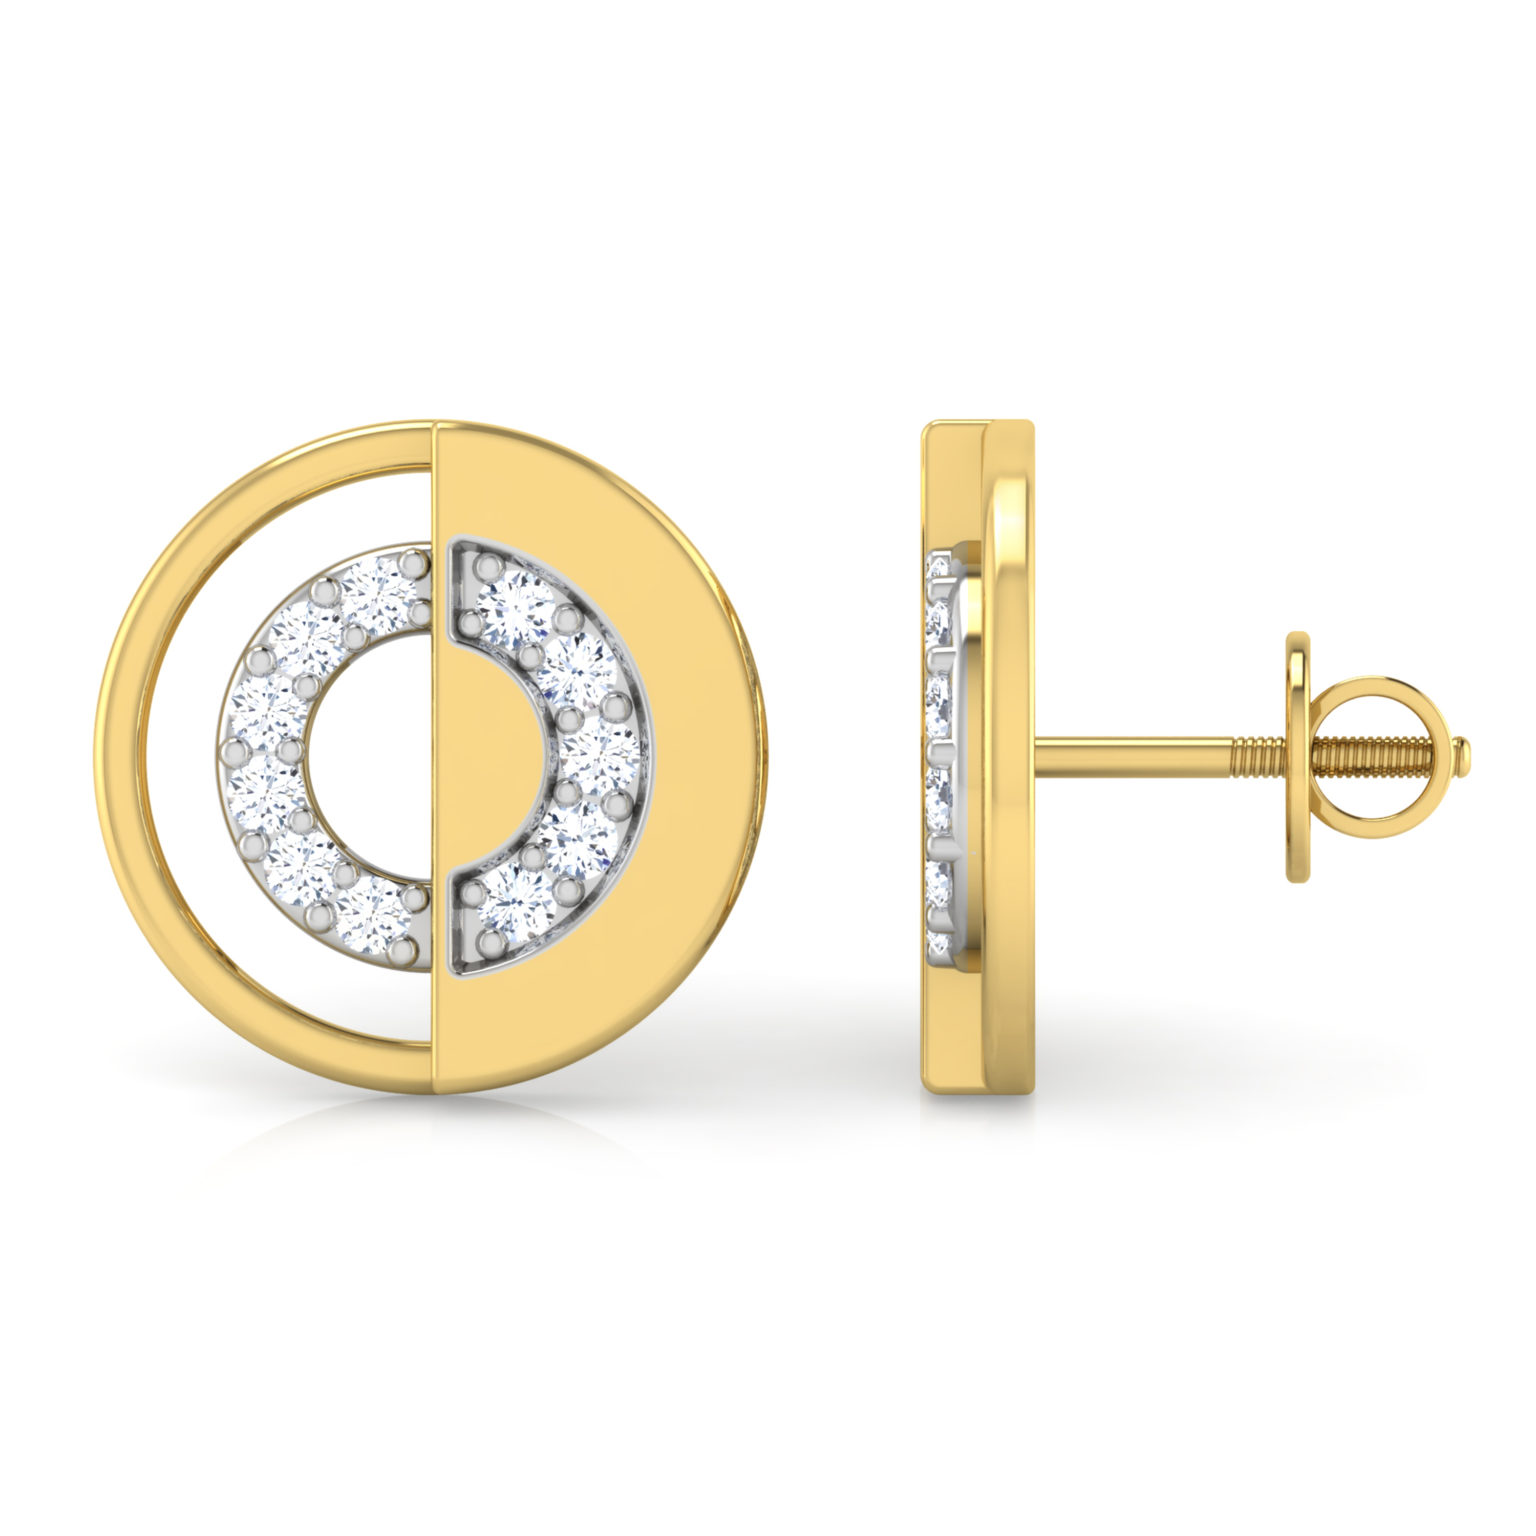 Mellow Earring Collection – 18 KT – RMDG ADER – 550